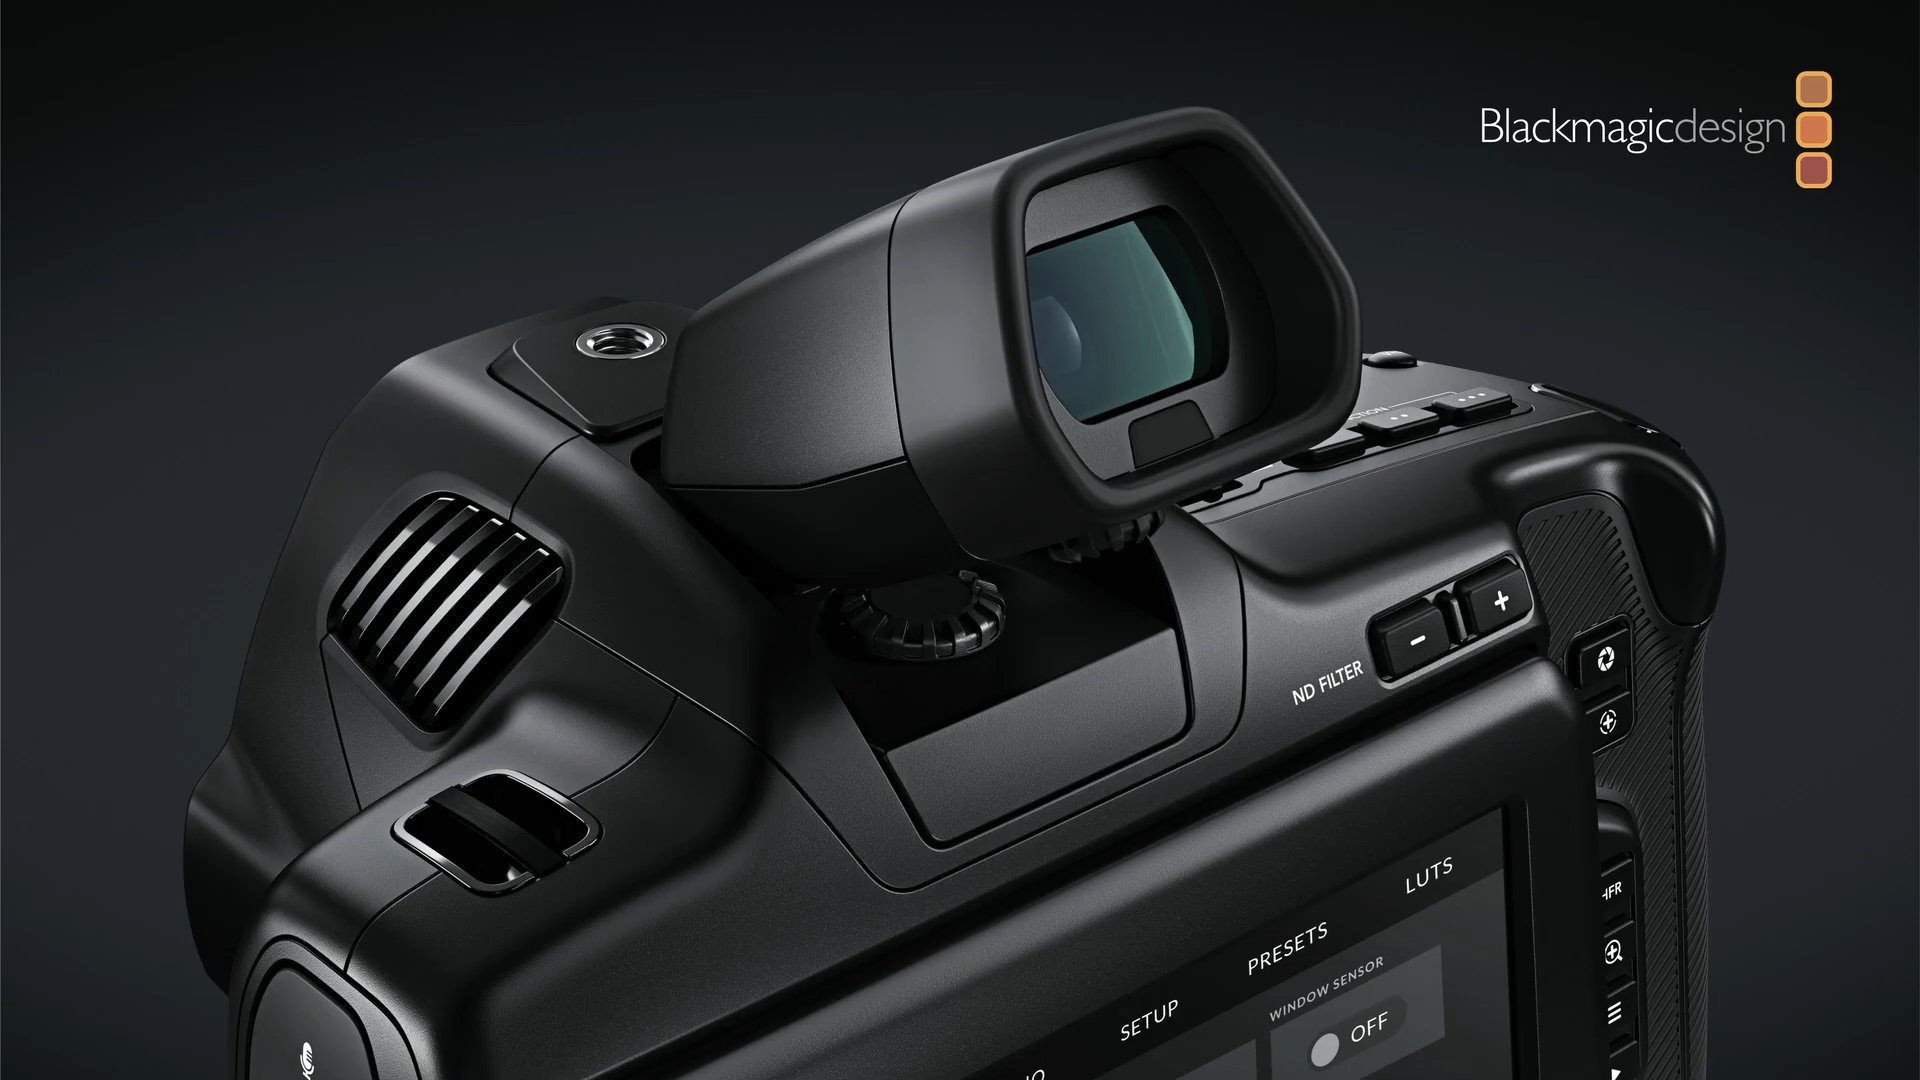 Blackmagic Pocket Cinema Camera 6K Pro with Built-in NDs 